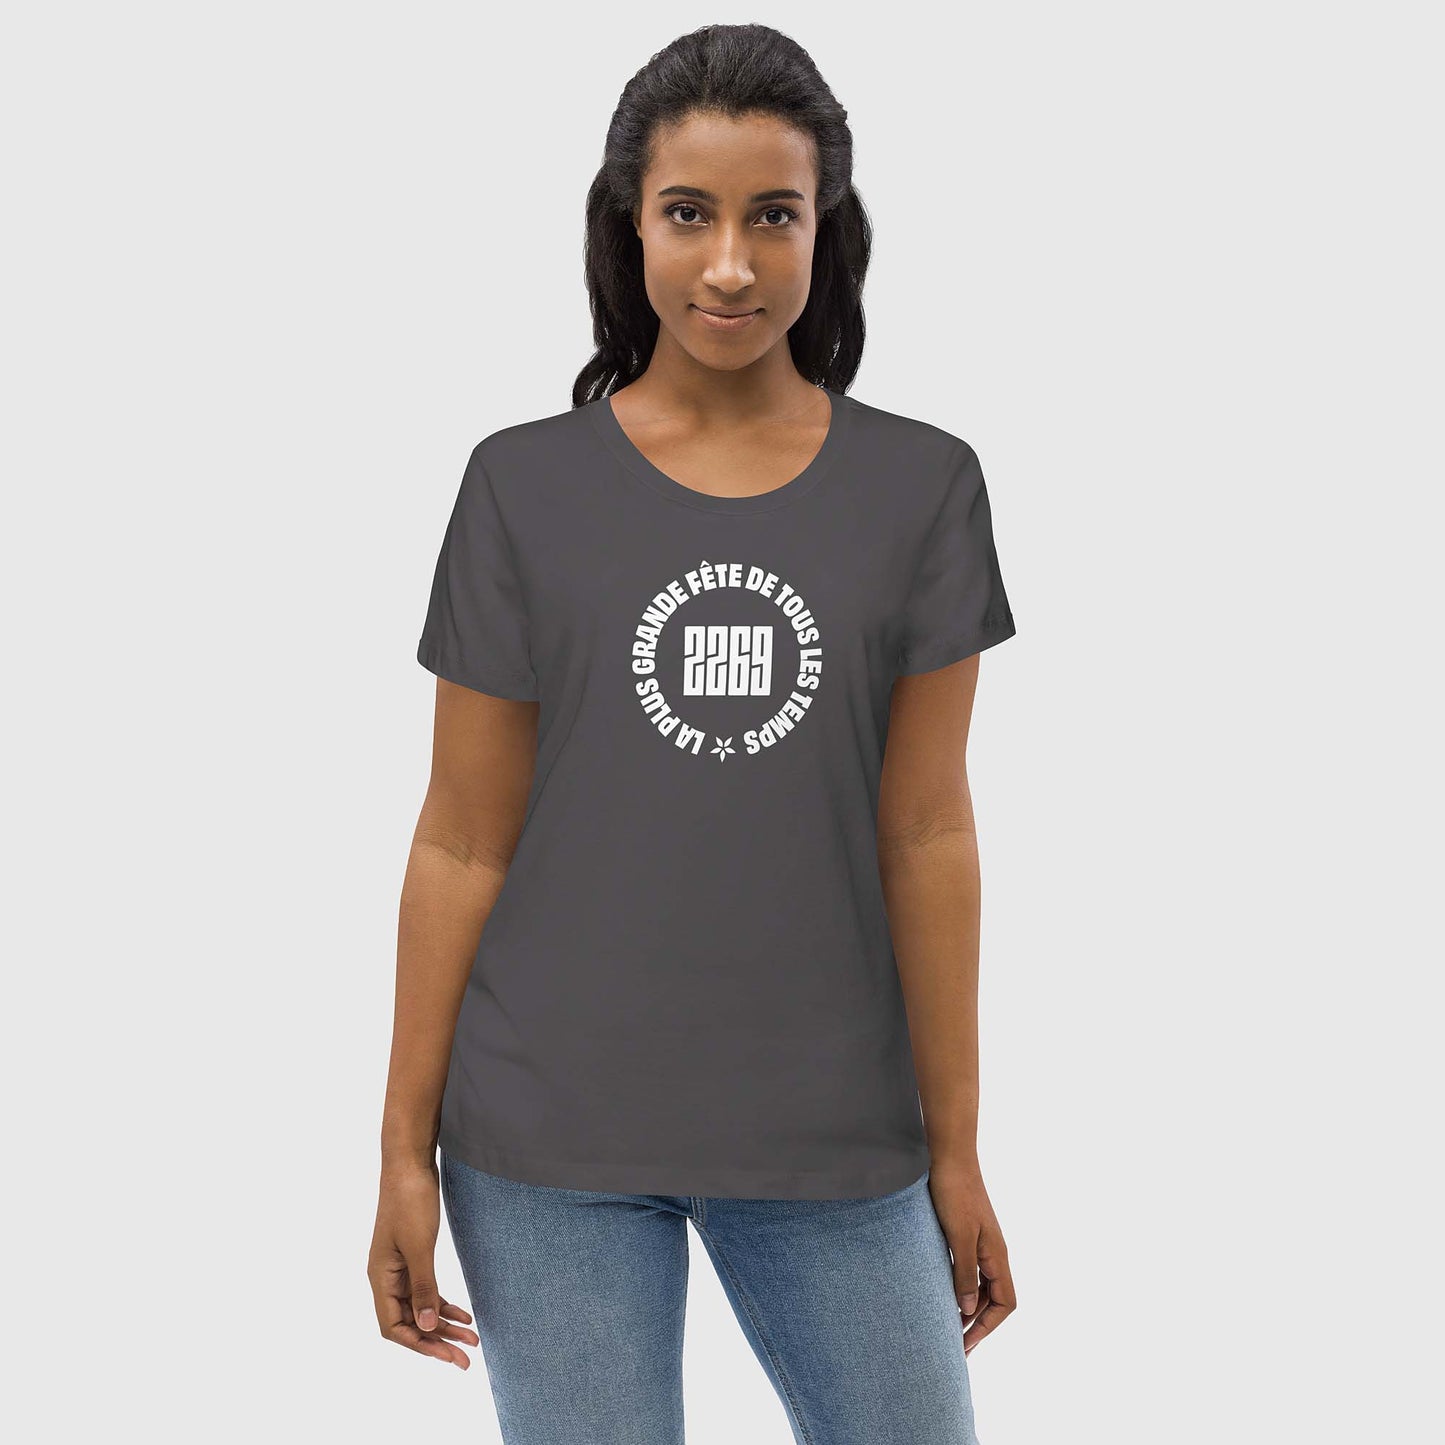 Women's anthracite fitted organic cotton t-shirt with French 2269 party circle